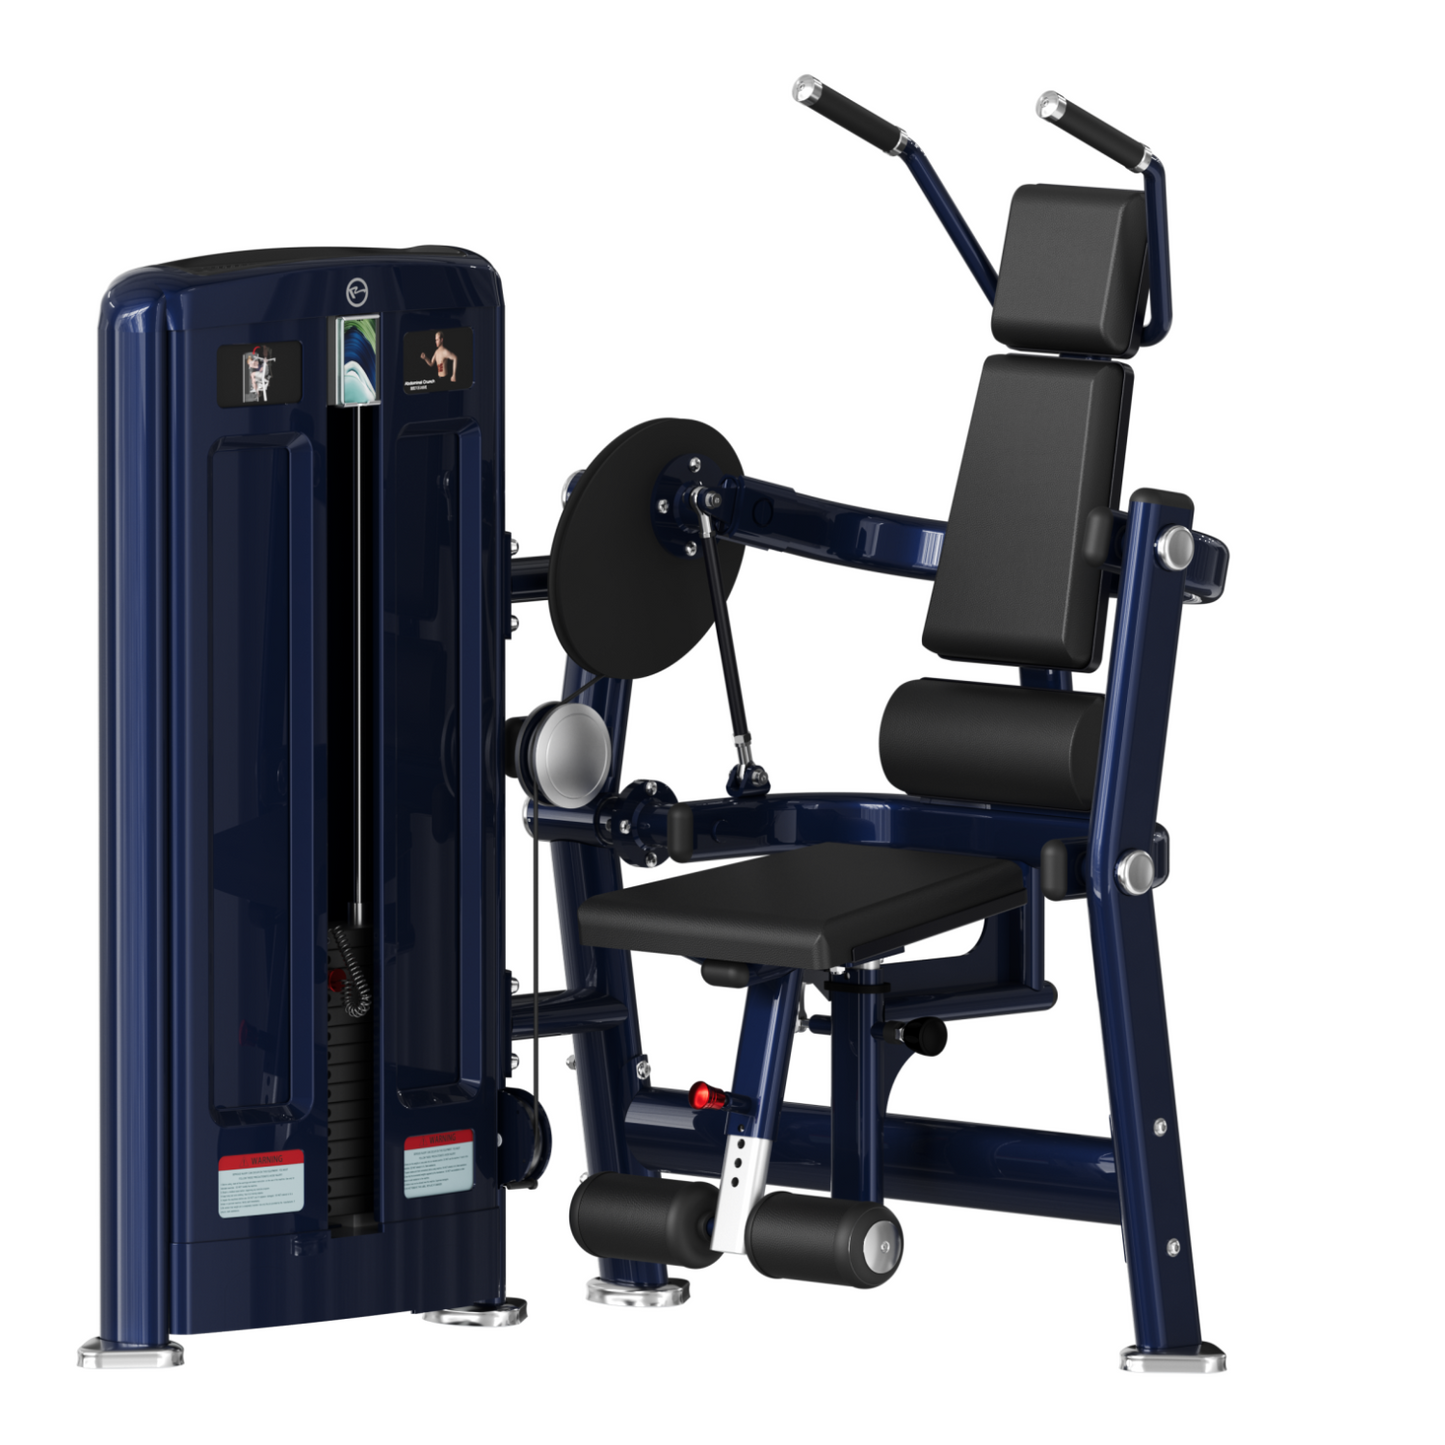 Realleader USA XRM71004 Commercial Abdominal Crunch